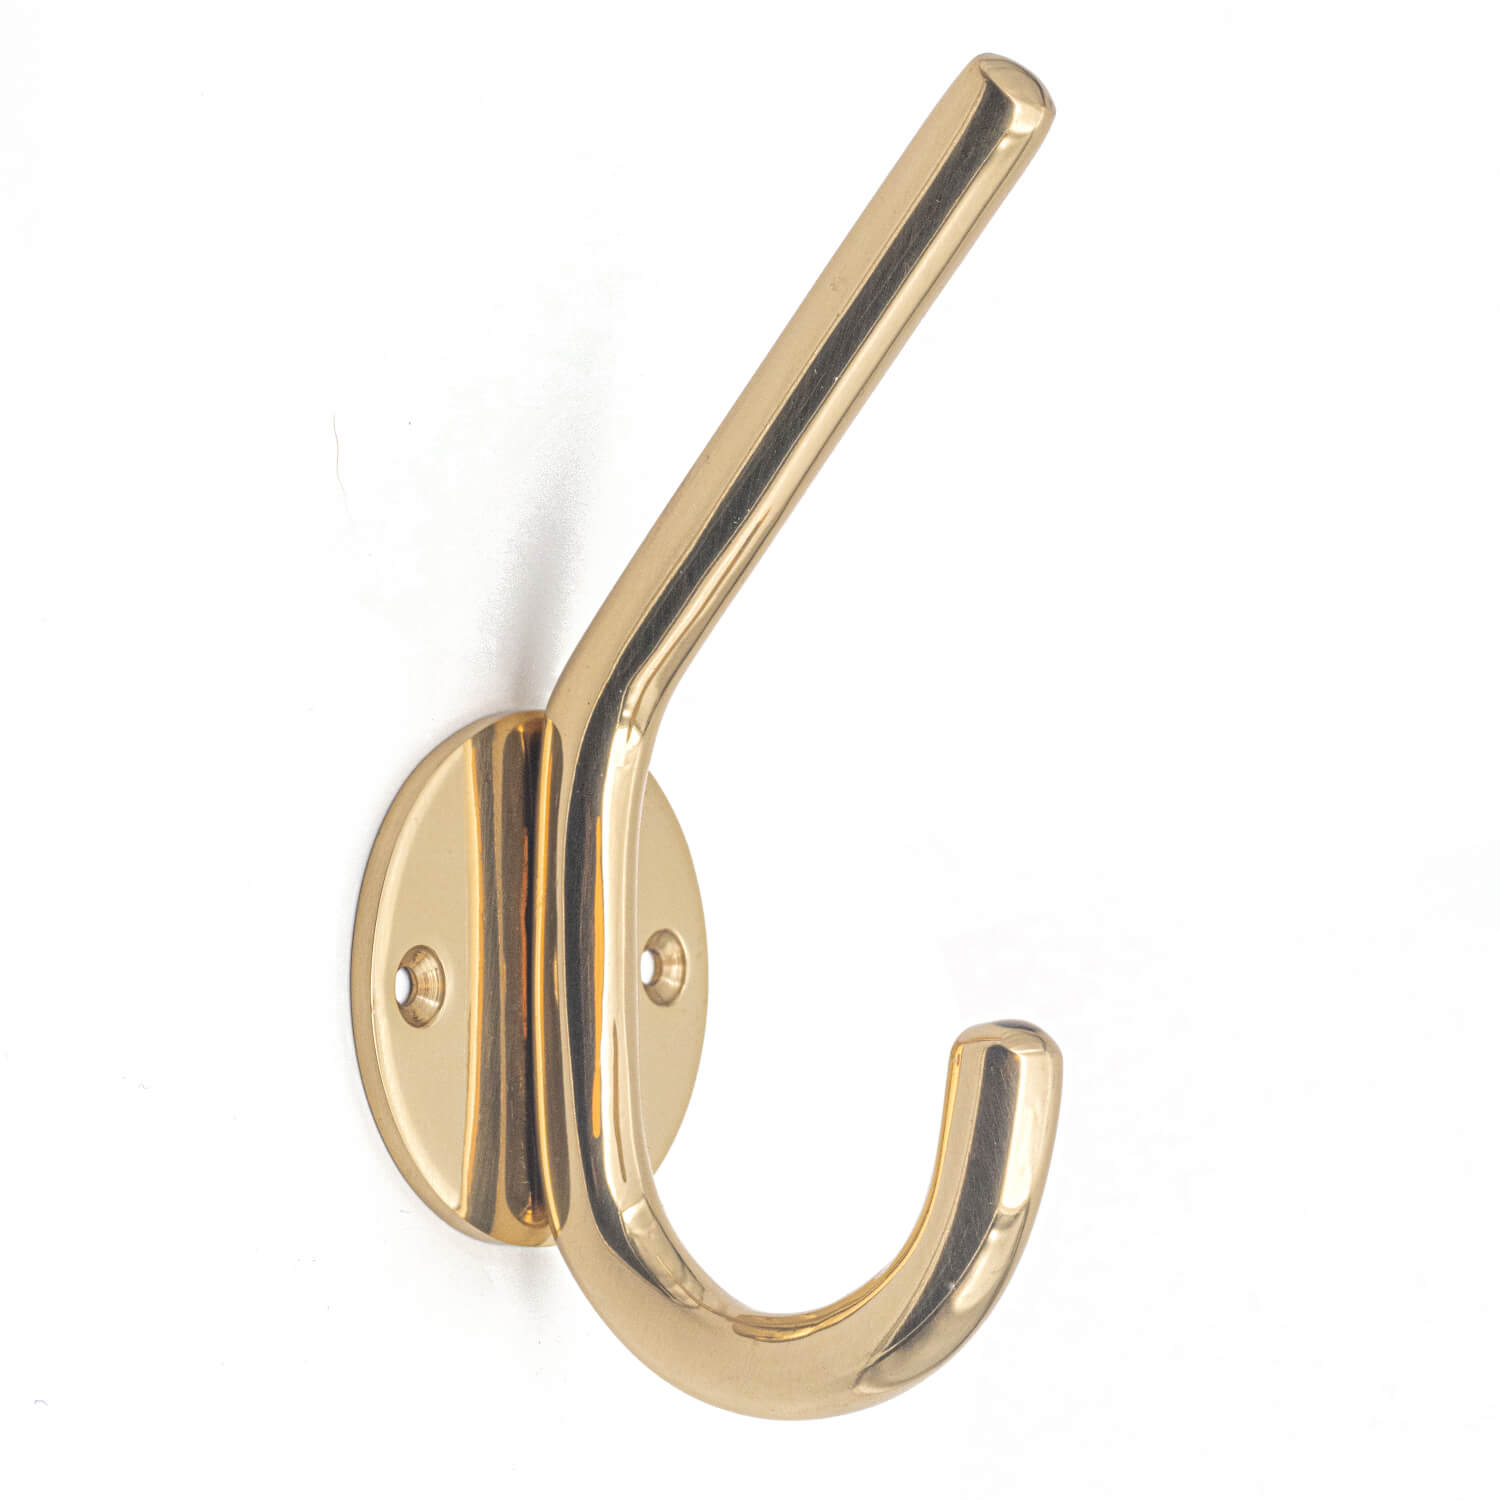 Buy Classic Brass Hat & Coat Hook Wall Bathroom Entryway Boot Room Gold  Bedroom Utility Kitchen Hallway Polished Aged Satin Brass Copper Online in  India 